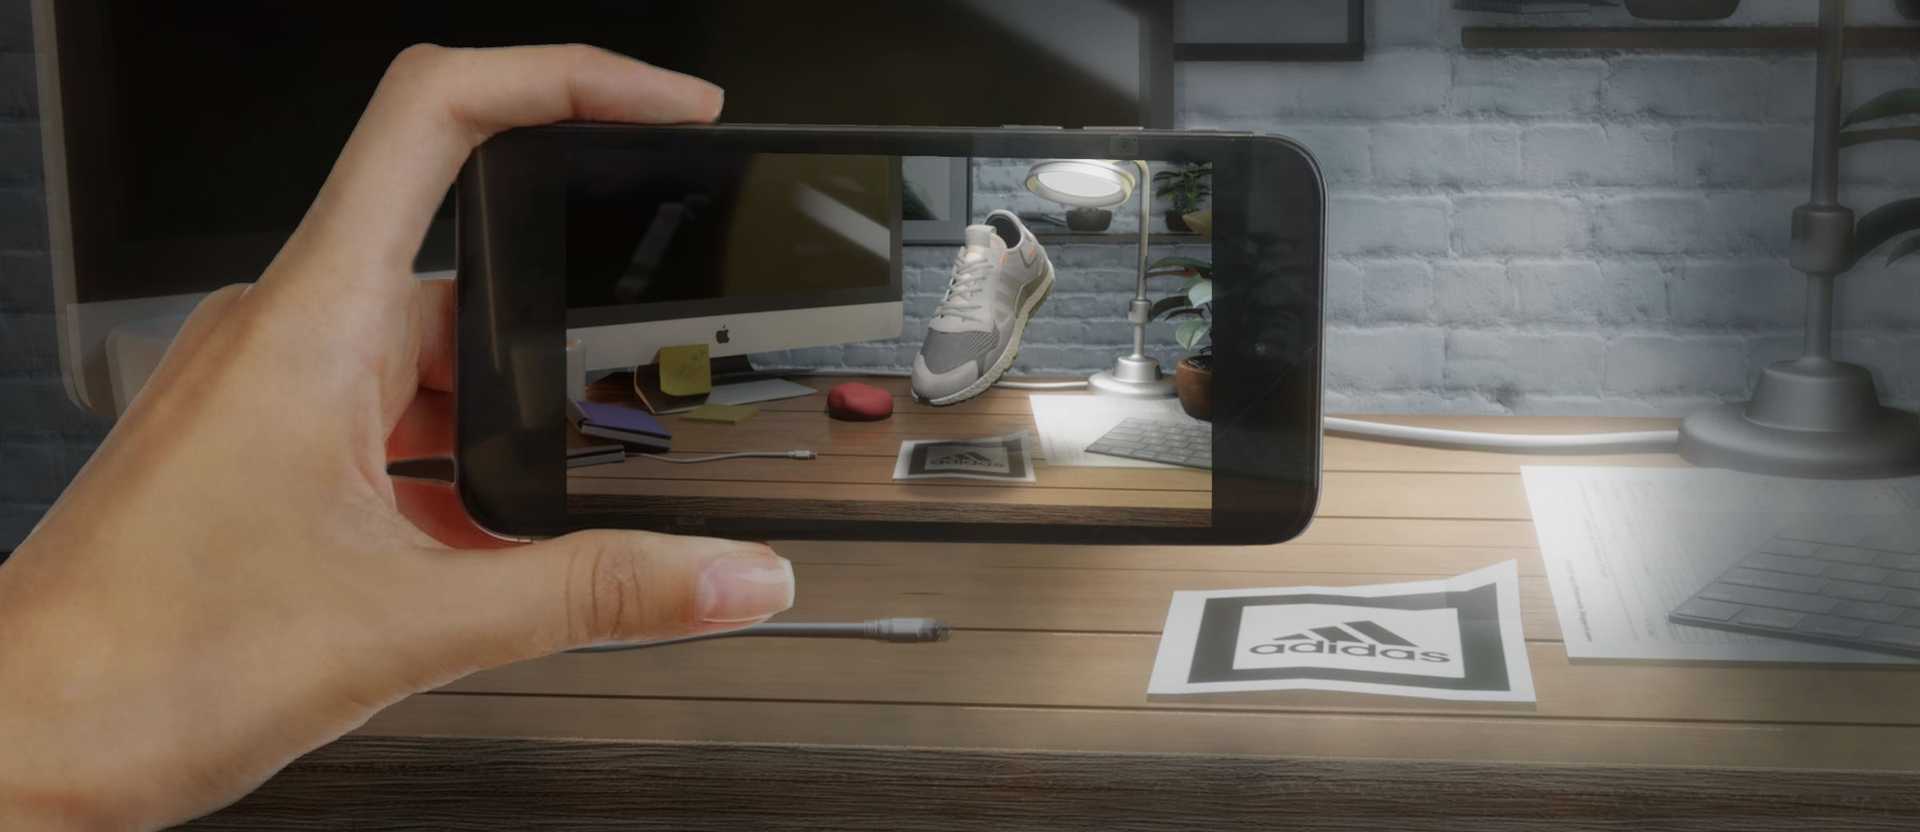 Example of a augmented reality product visualizer with a Adidas shoe